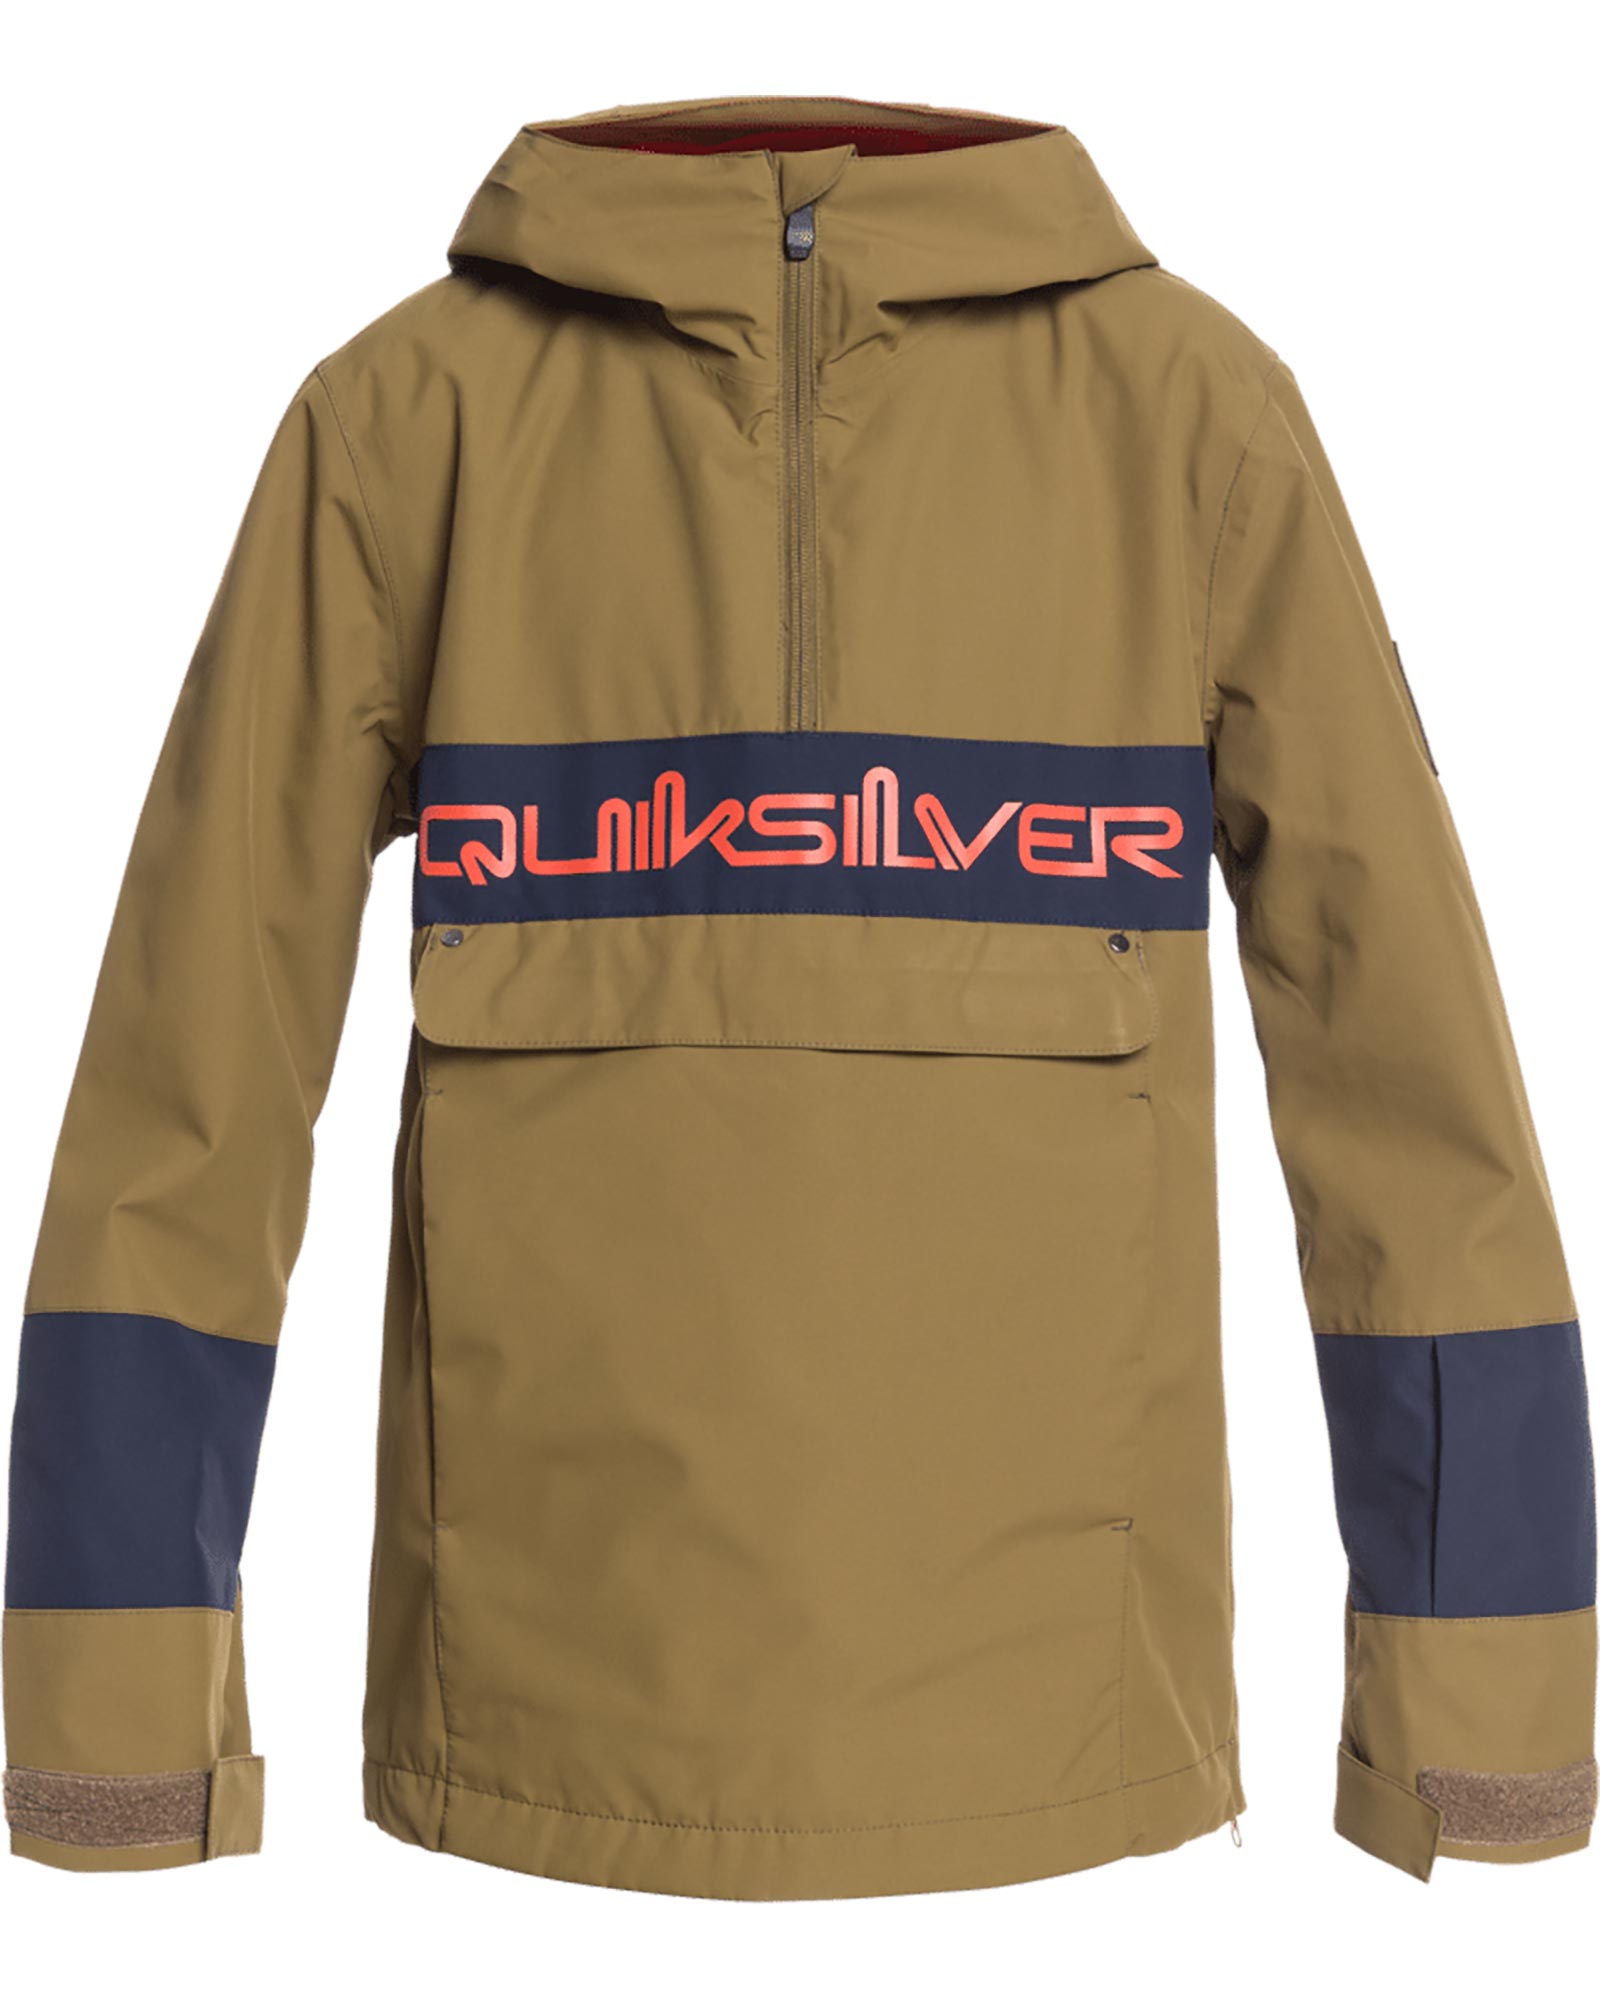 Quiksilver Steeze Boys’ Jacket K14 - Military Olive 16 Years